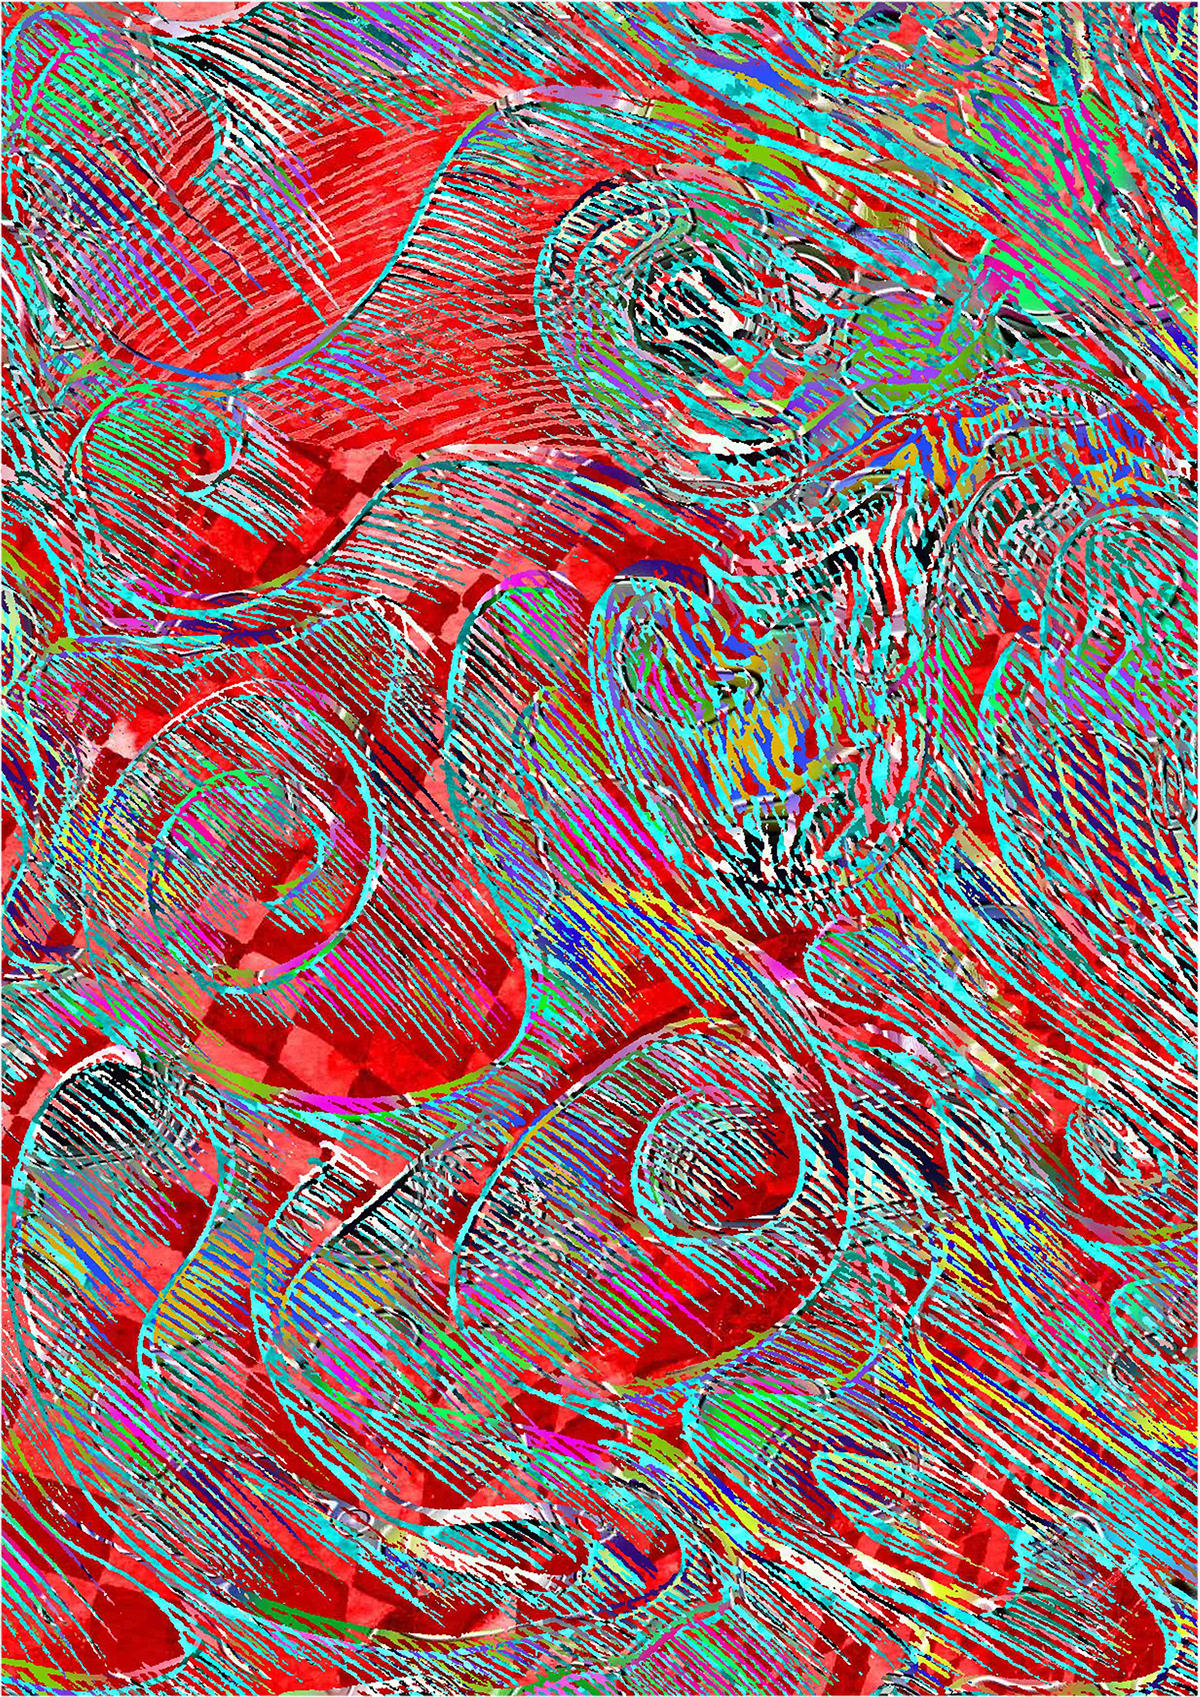 mixing technics ink design image numerical processing abstract Personal Work psychedelic digital popart Pop Art artwork